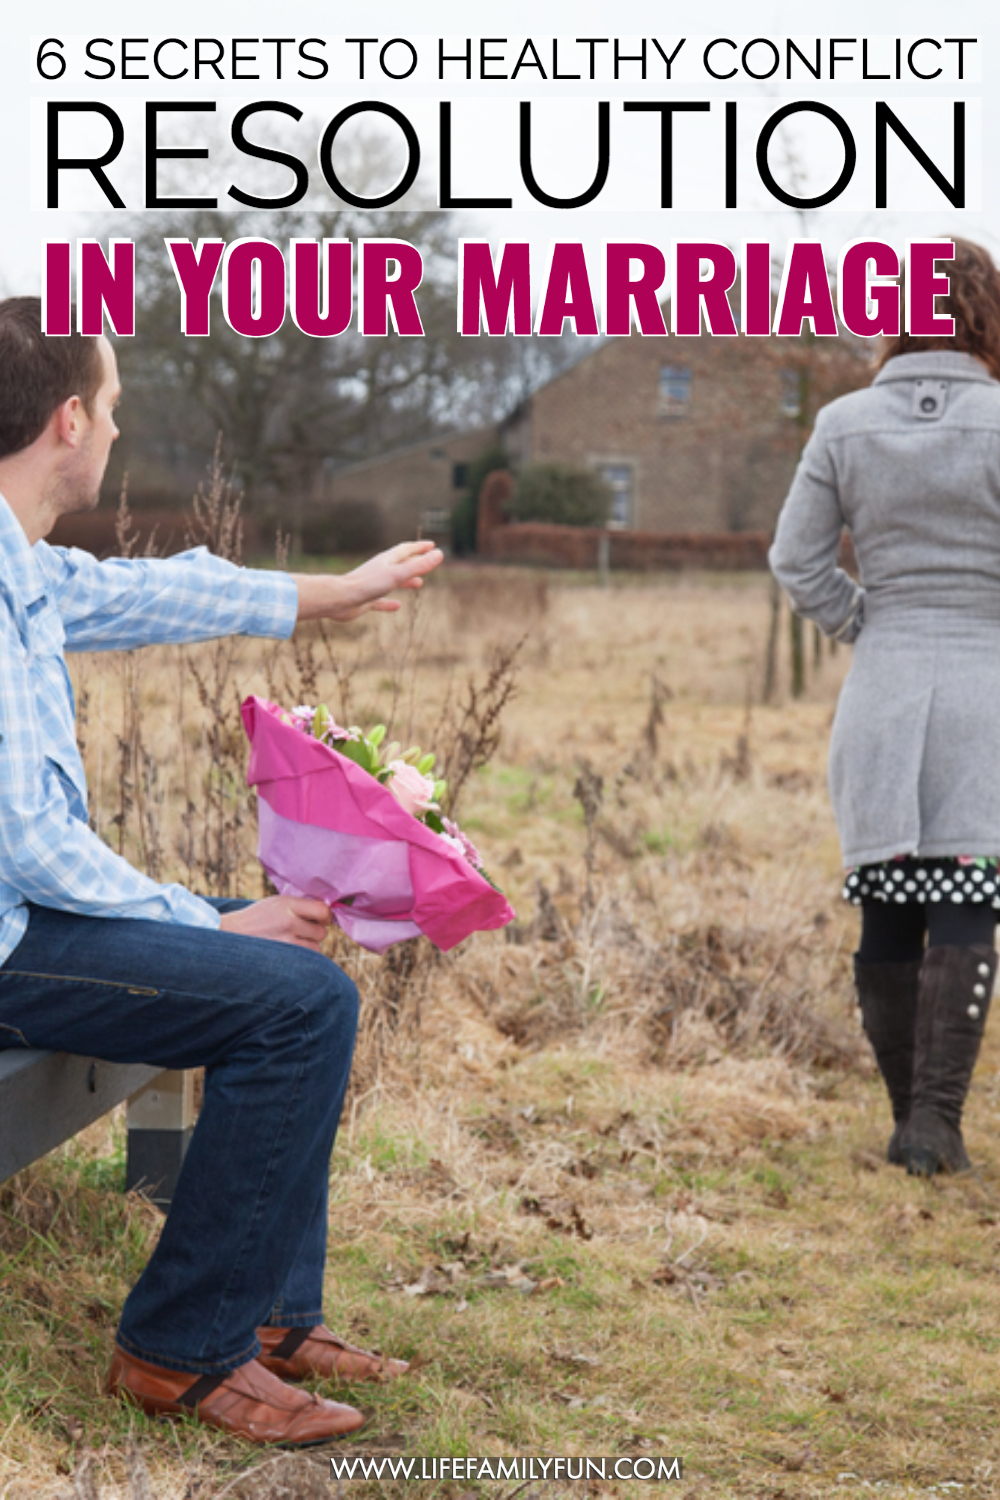 Healthy marriage conflicts